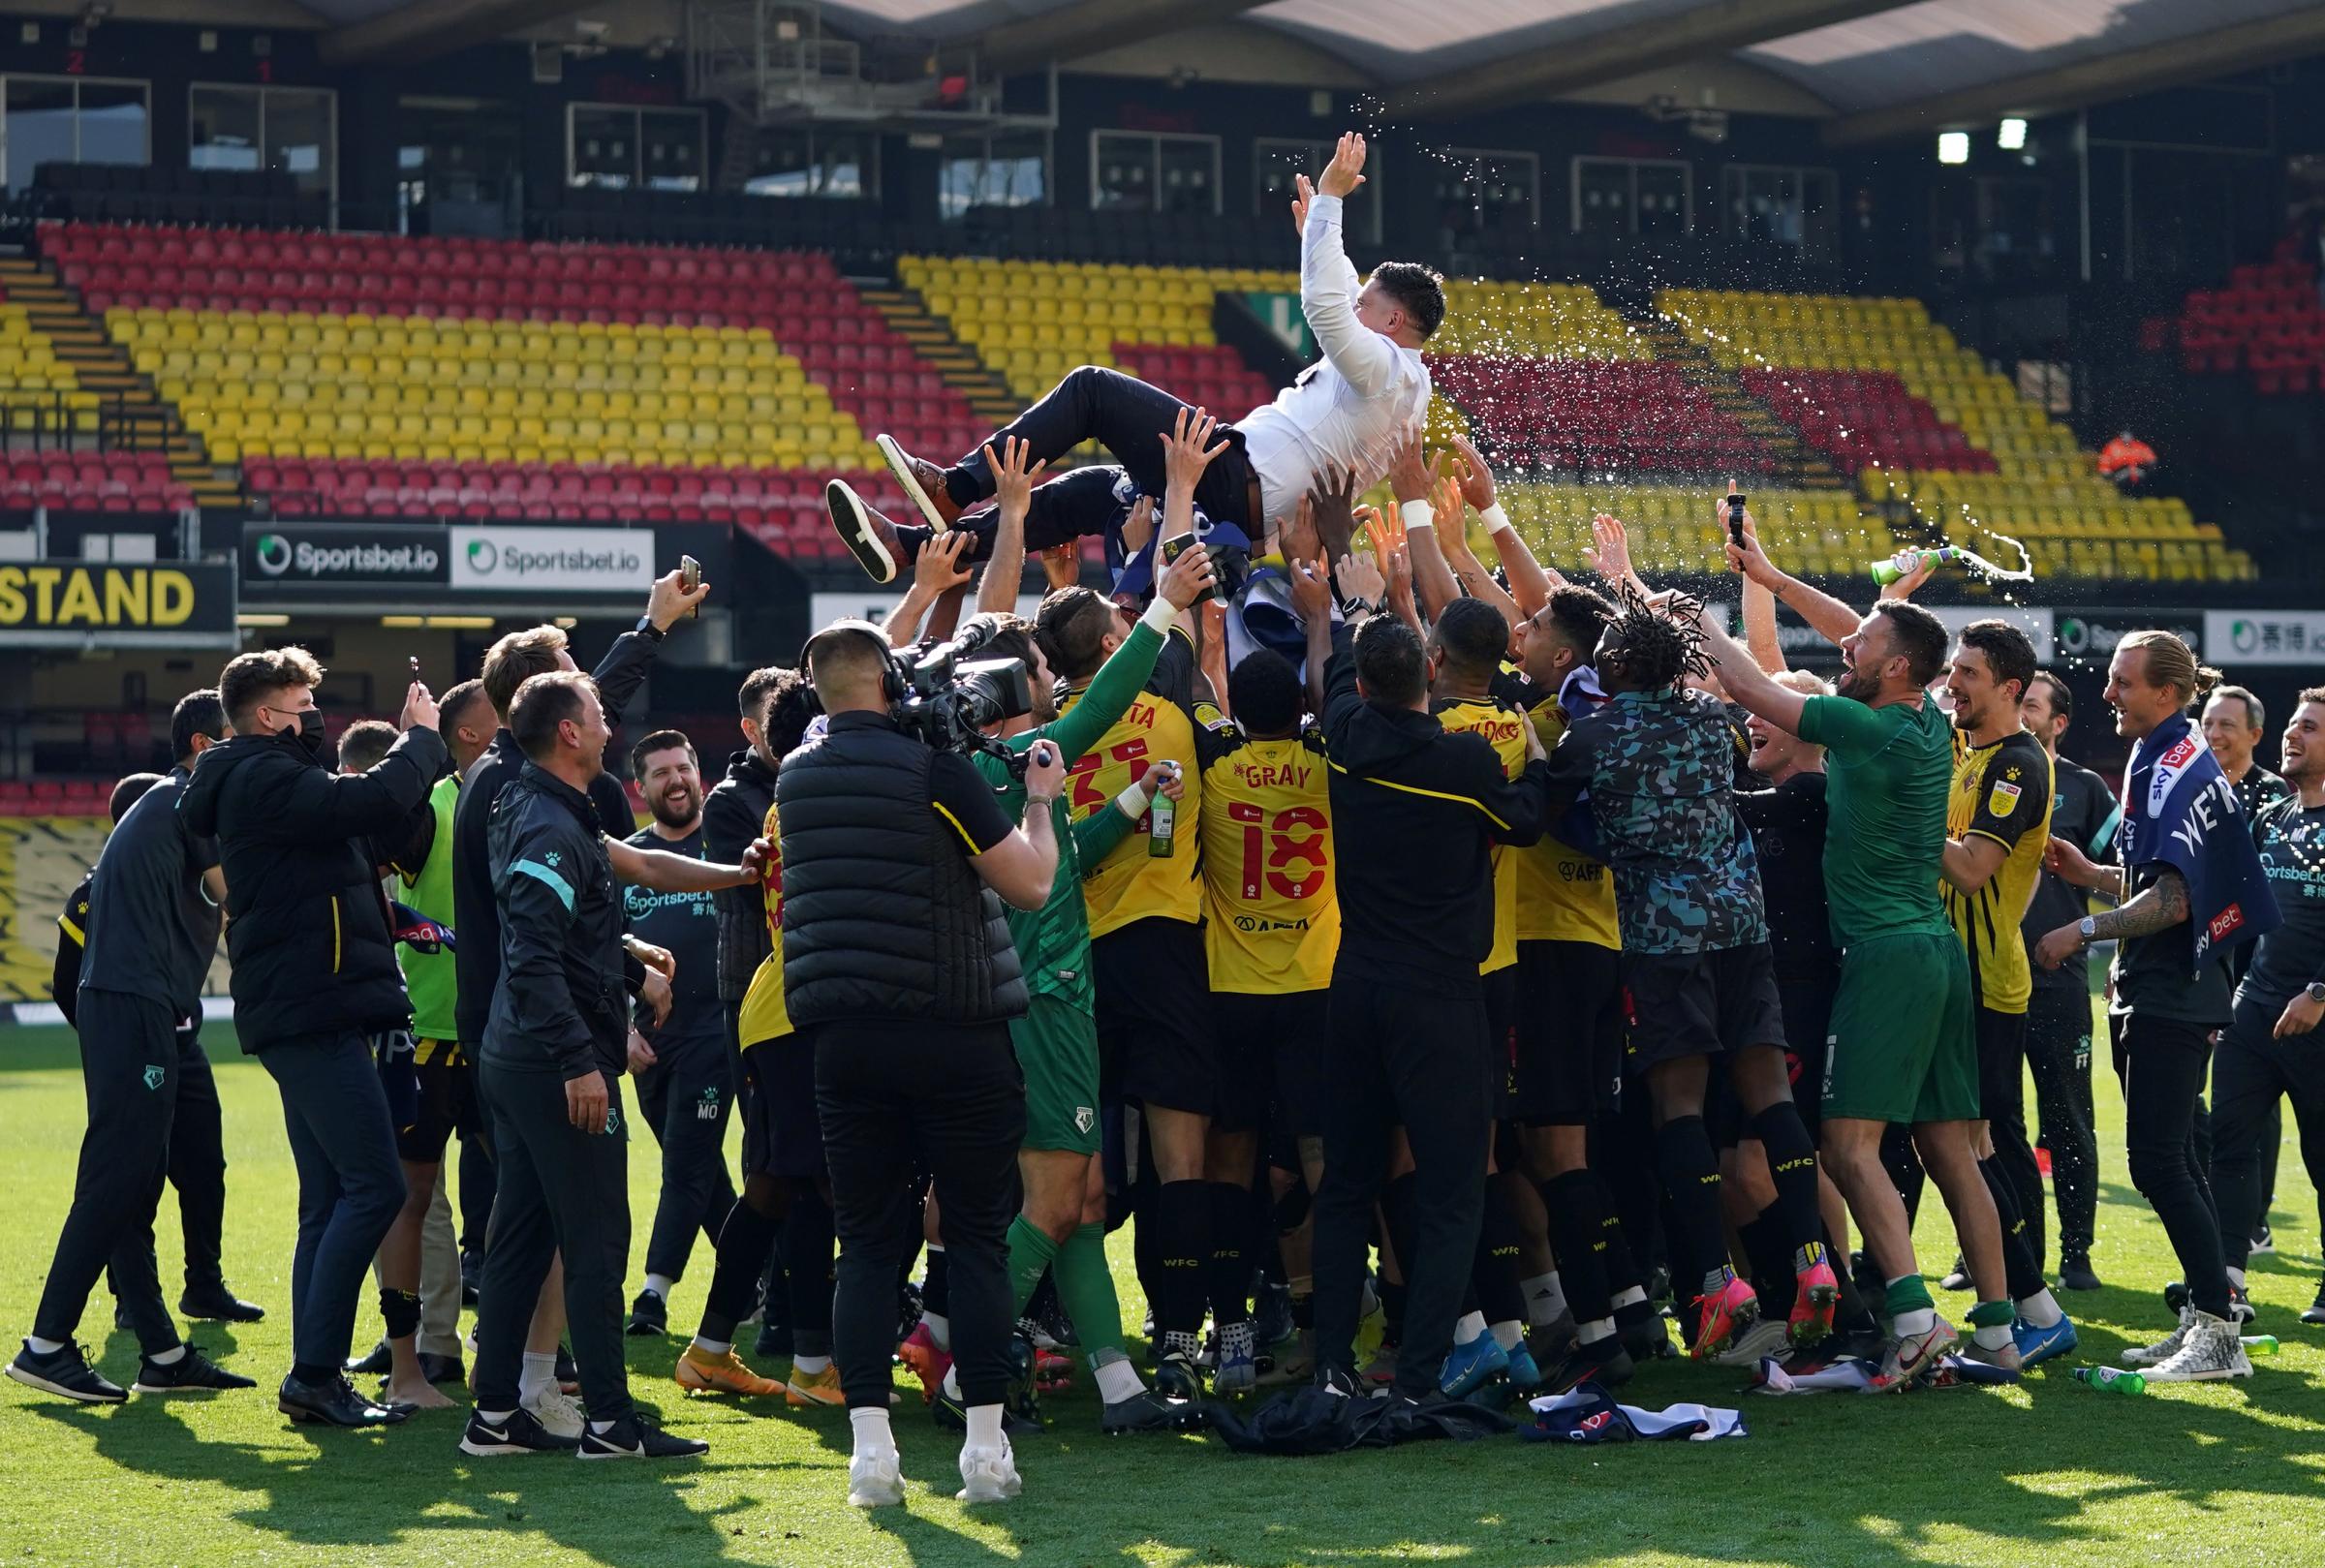 Manager Xisco is thrown in their air in celebration at the final whistle following their confirmed promotion. Photo: PA